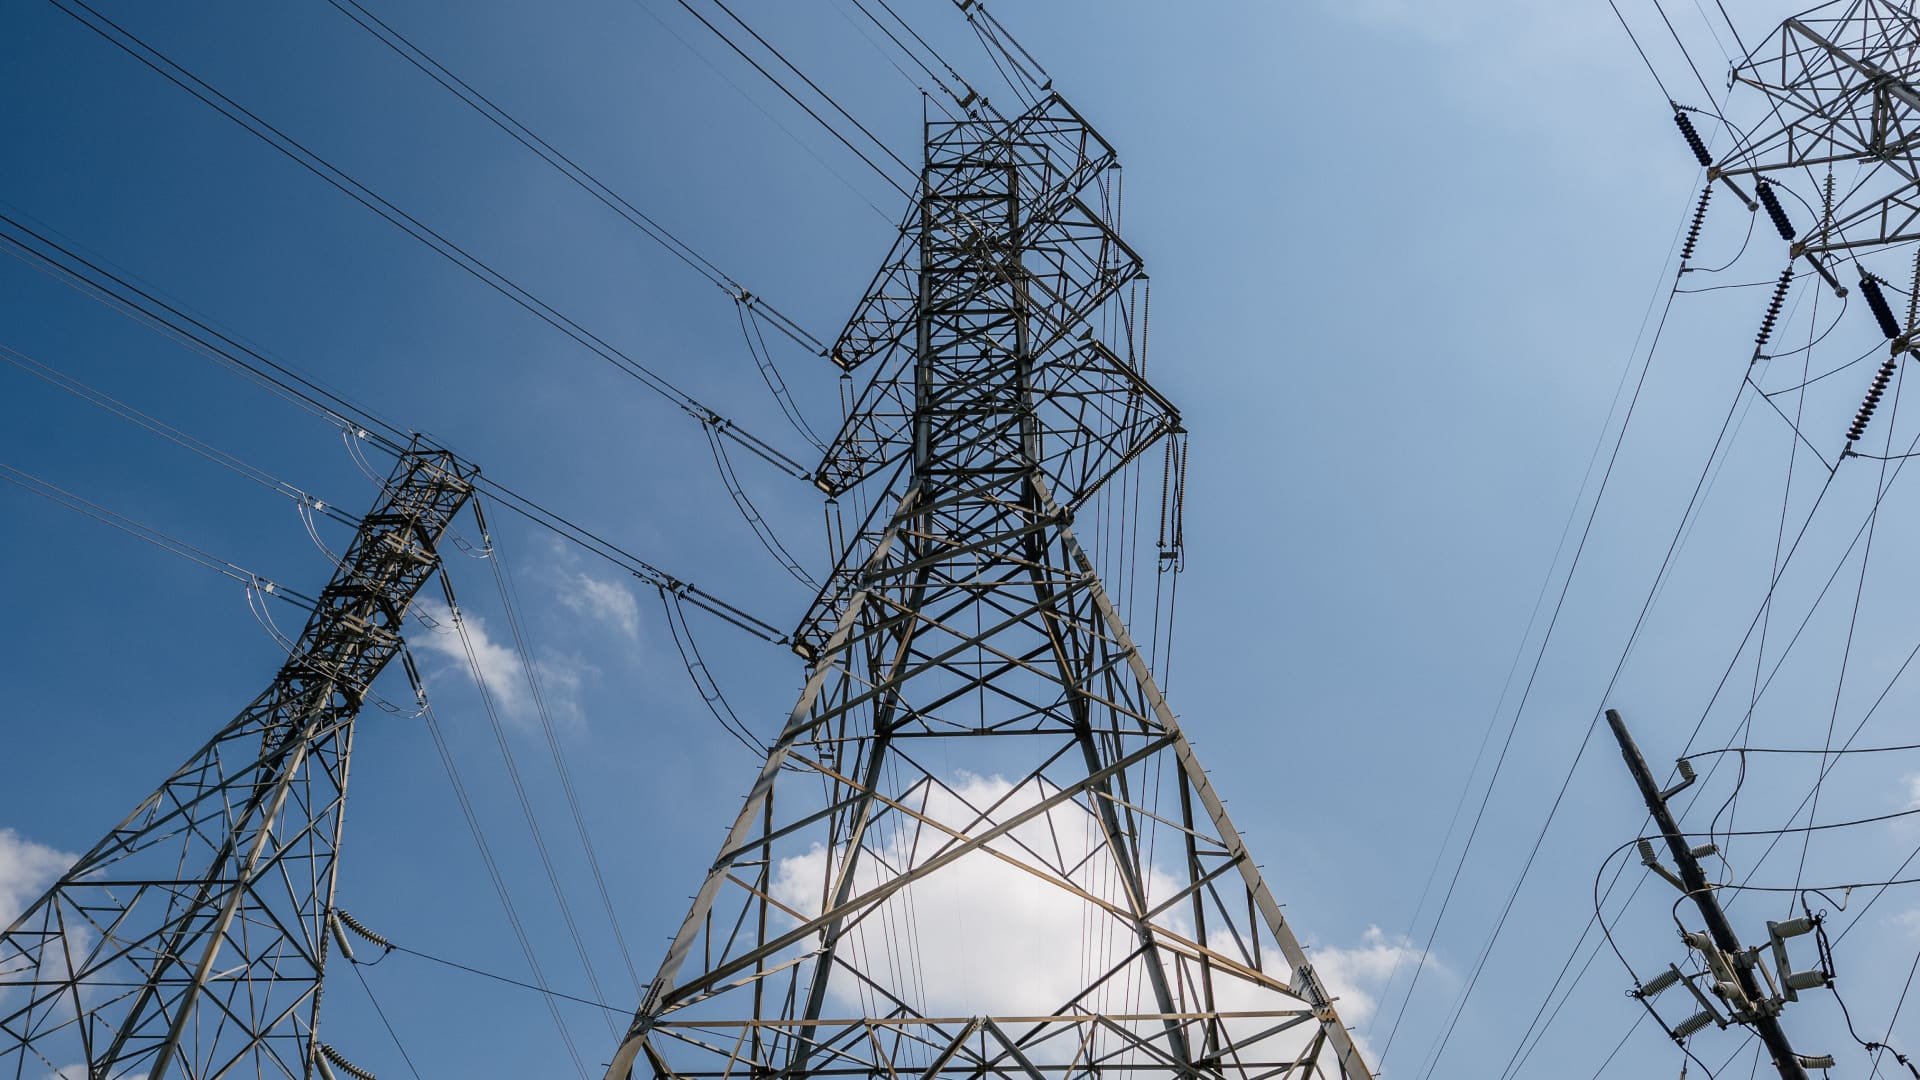 Transmission towers are shown on June 15, 2021 in Houston, Texas. The Electric Reliability Council of Texas (ERCOT), which controls approximately 90% of the power in Texas, has requested Texas residents to conserve power through Friday as temperatures surge in the state.